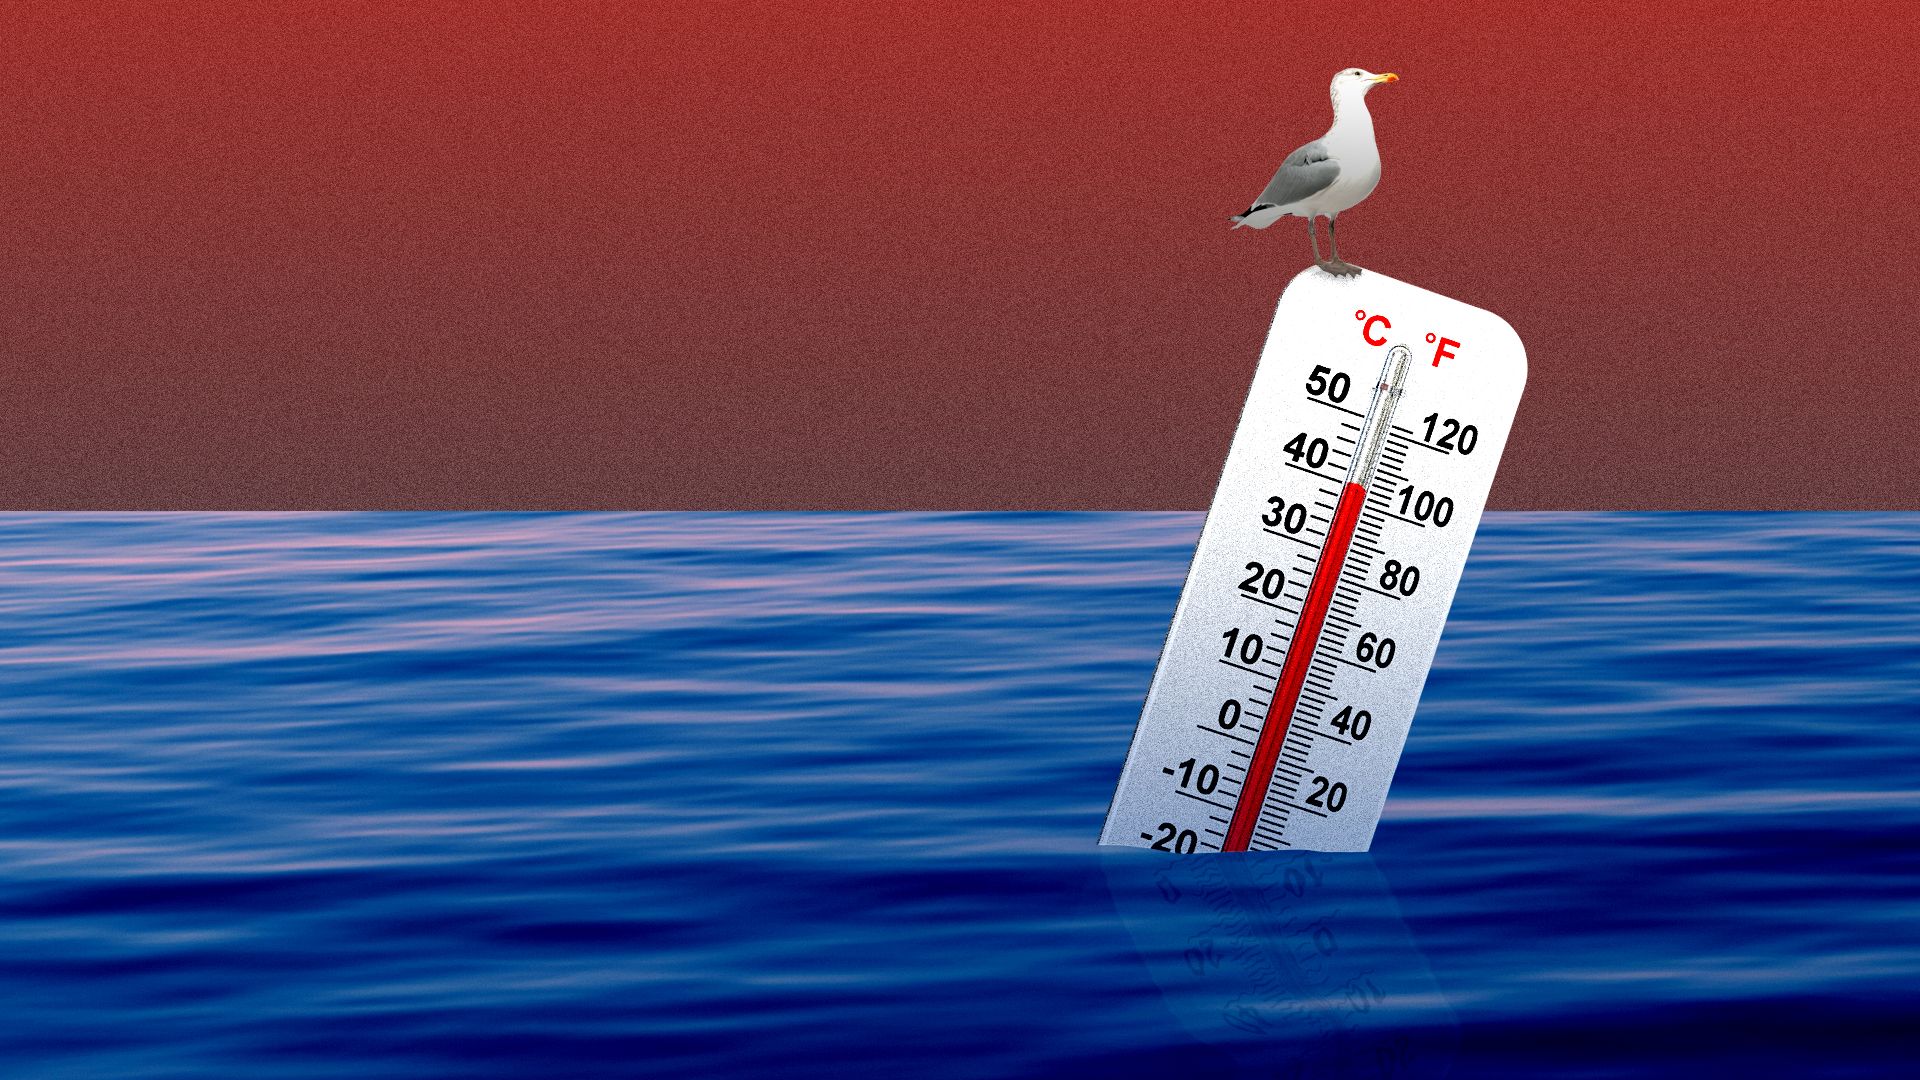 Illustration for story about research into ocean warming